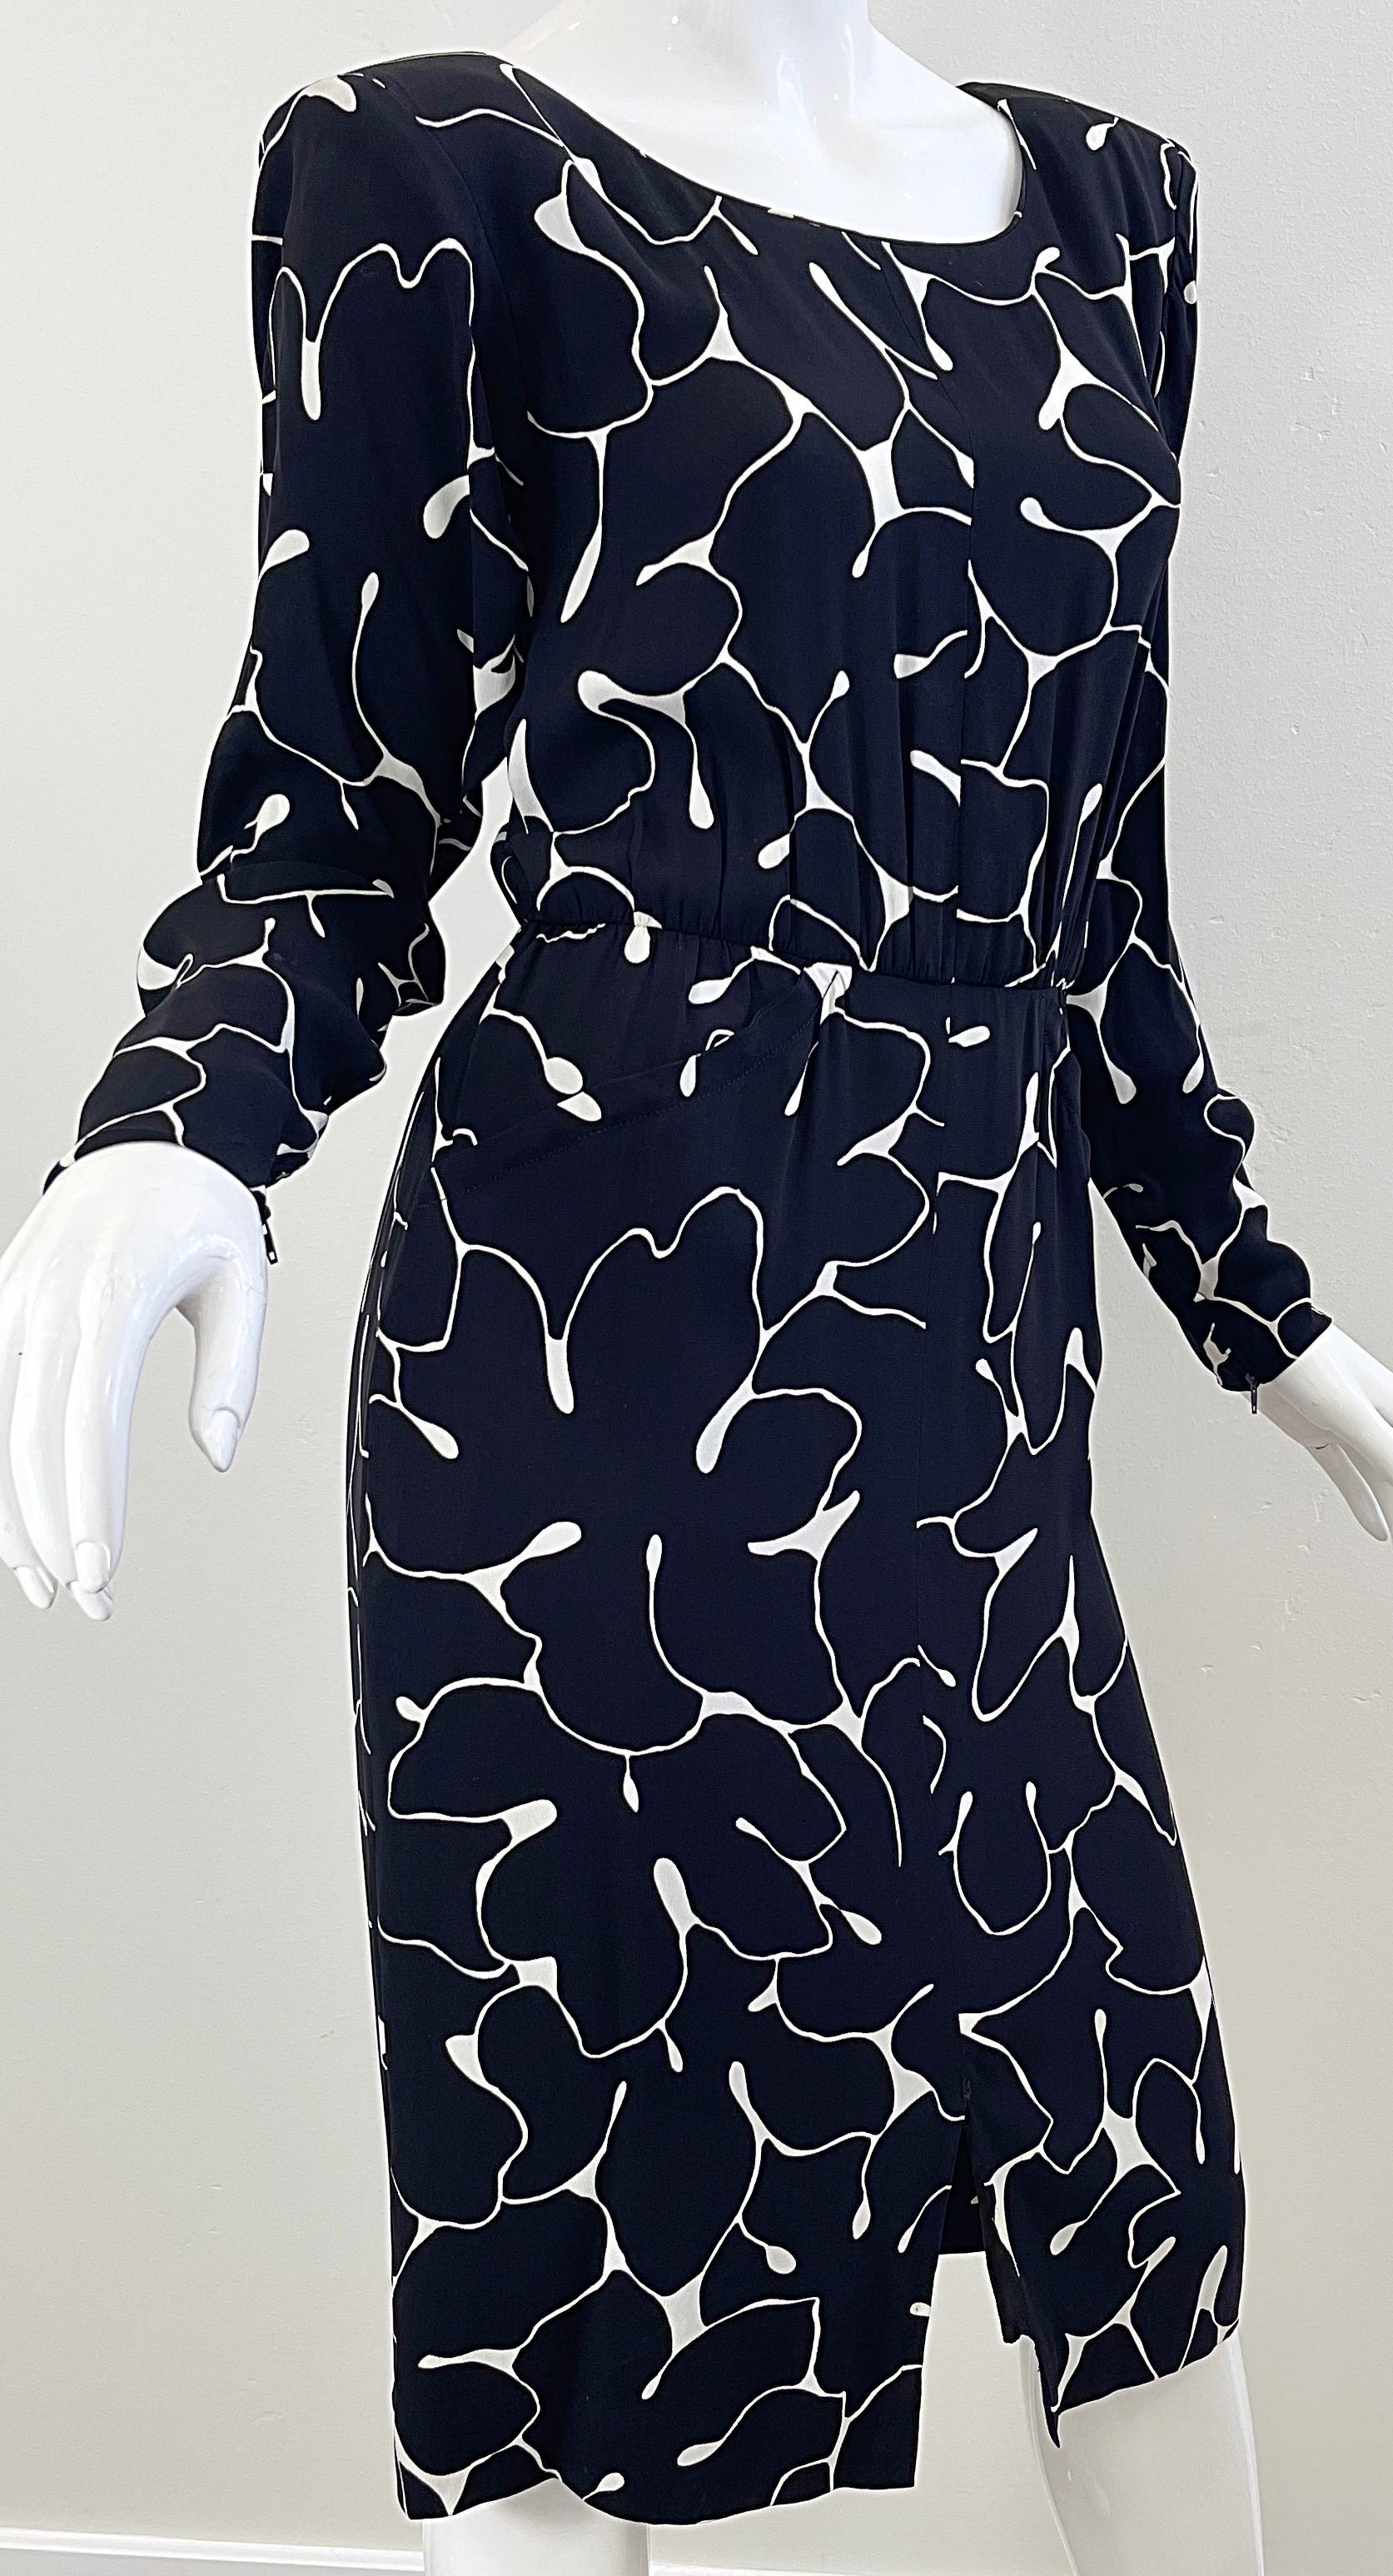 Yves Saint Laurent 1980s Black and White Abstract Flower Print Silk Crepe Dress For Sale 11